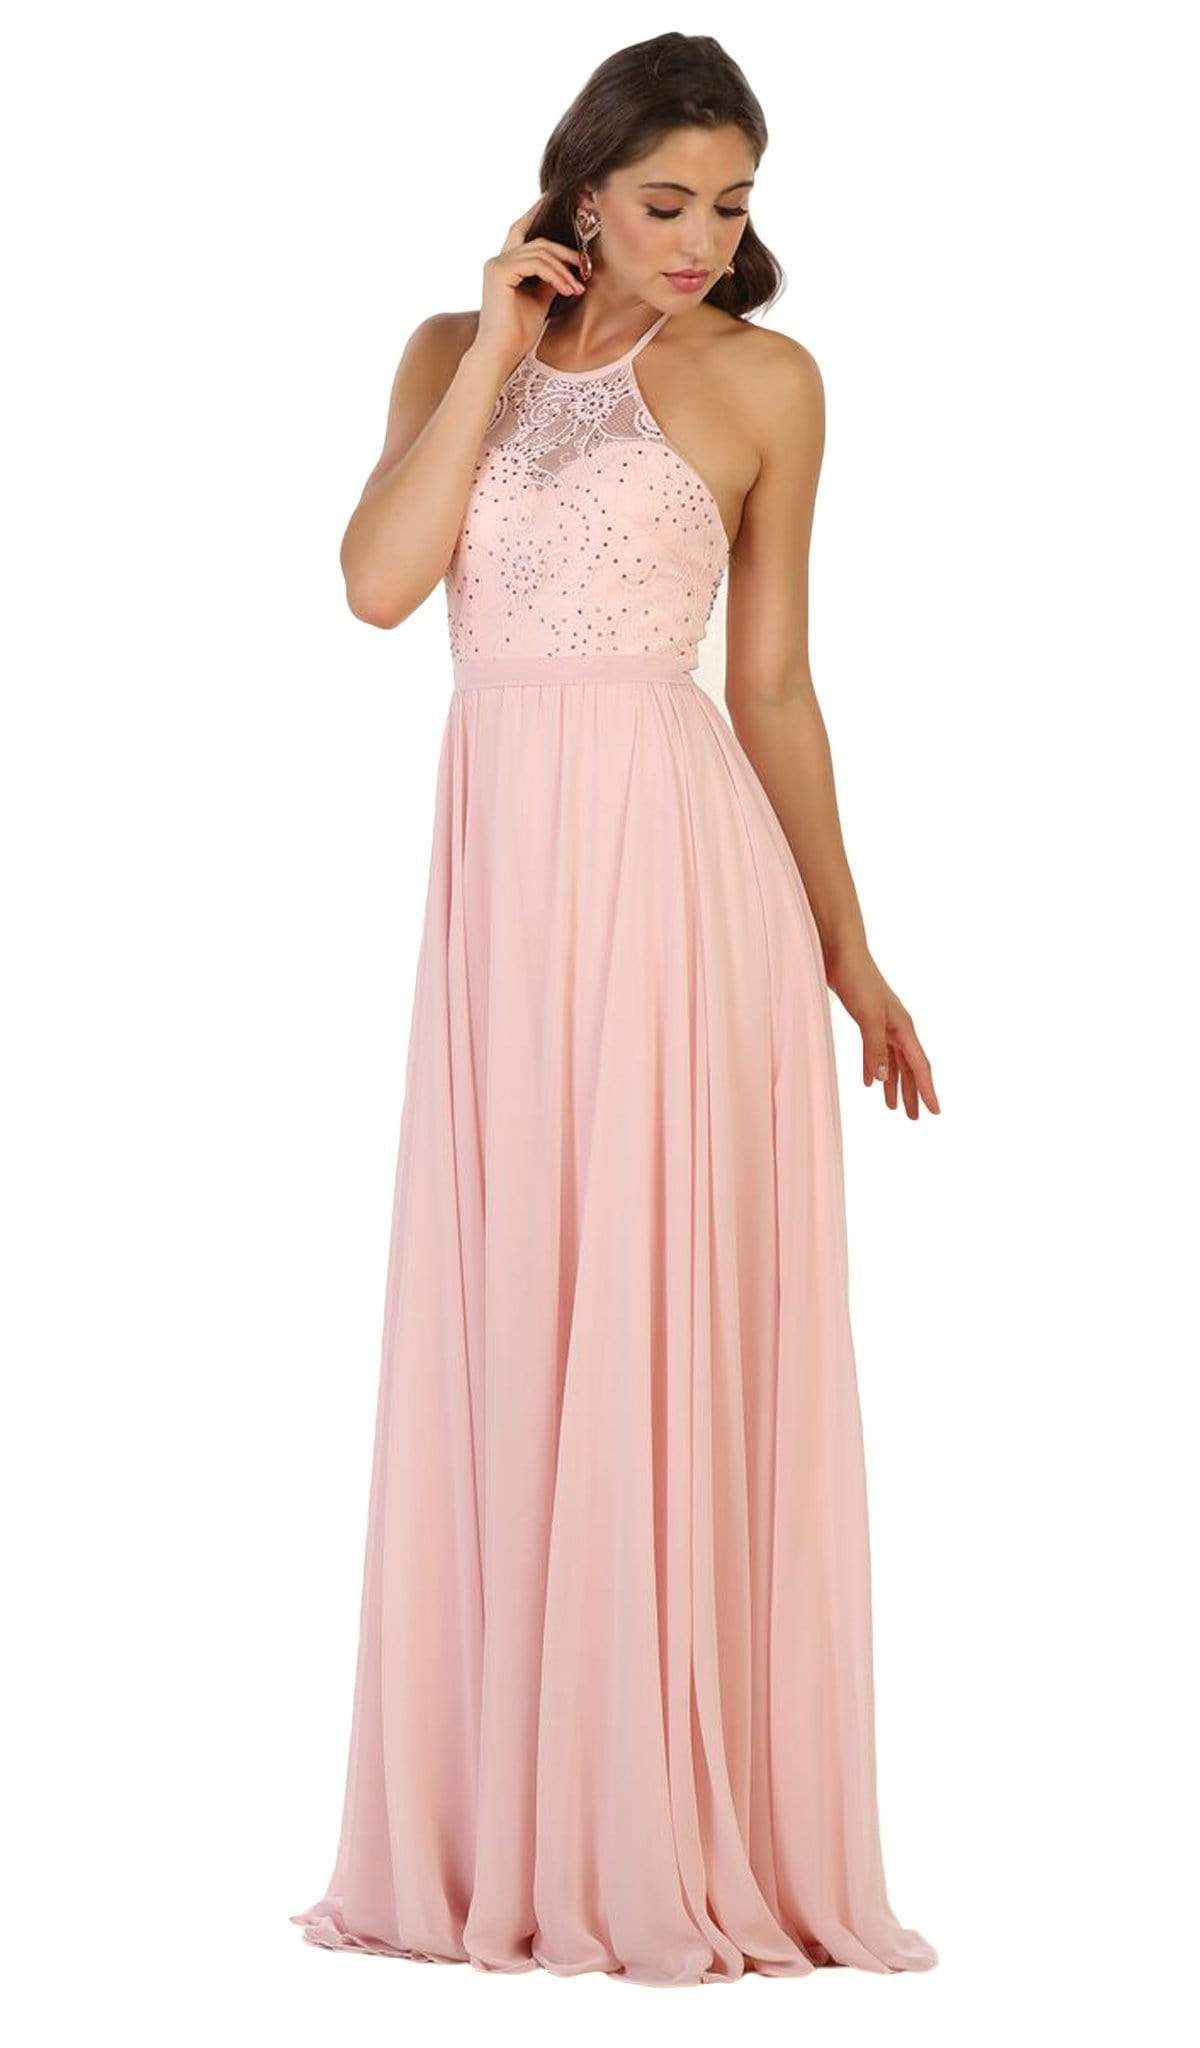 May Queen - Embellished Illusion Halter A-line Evening Dress